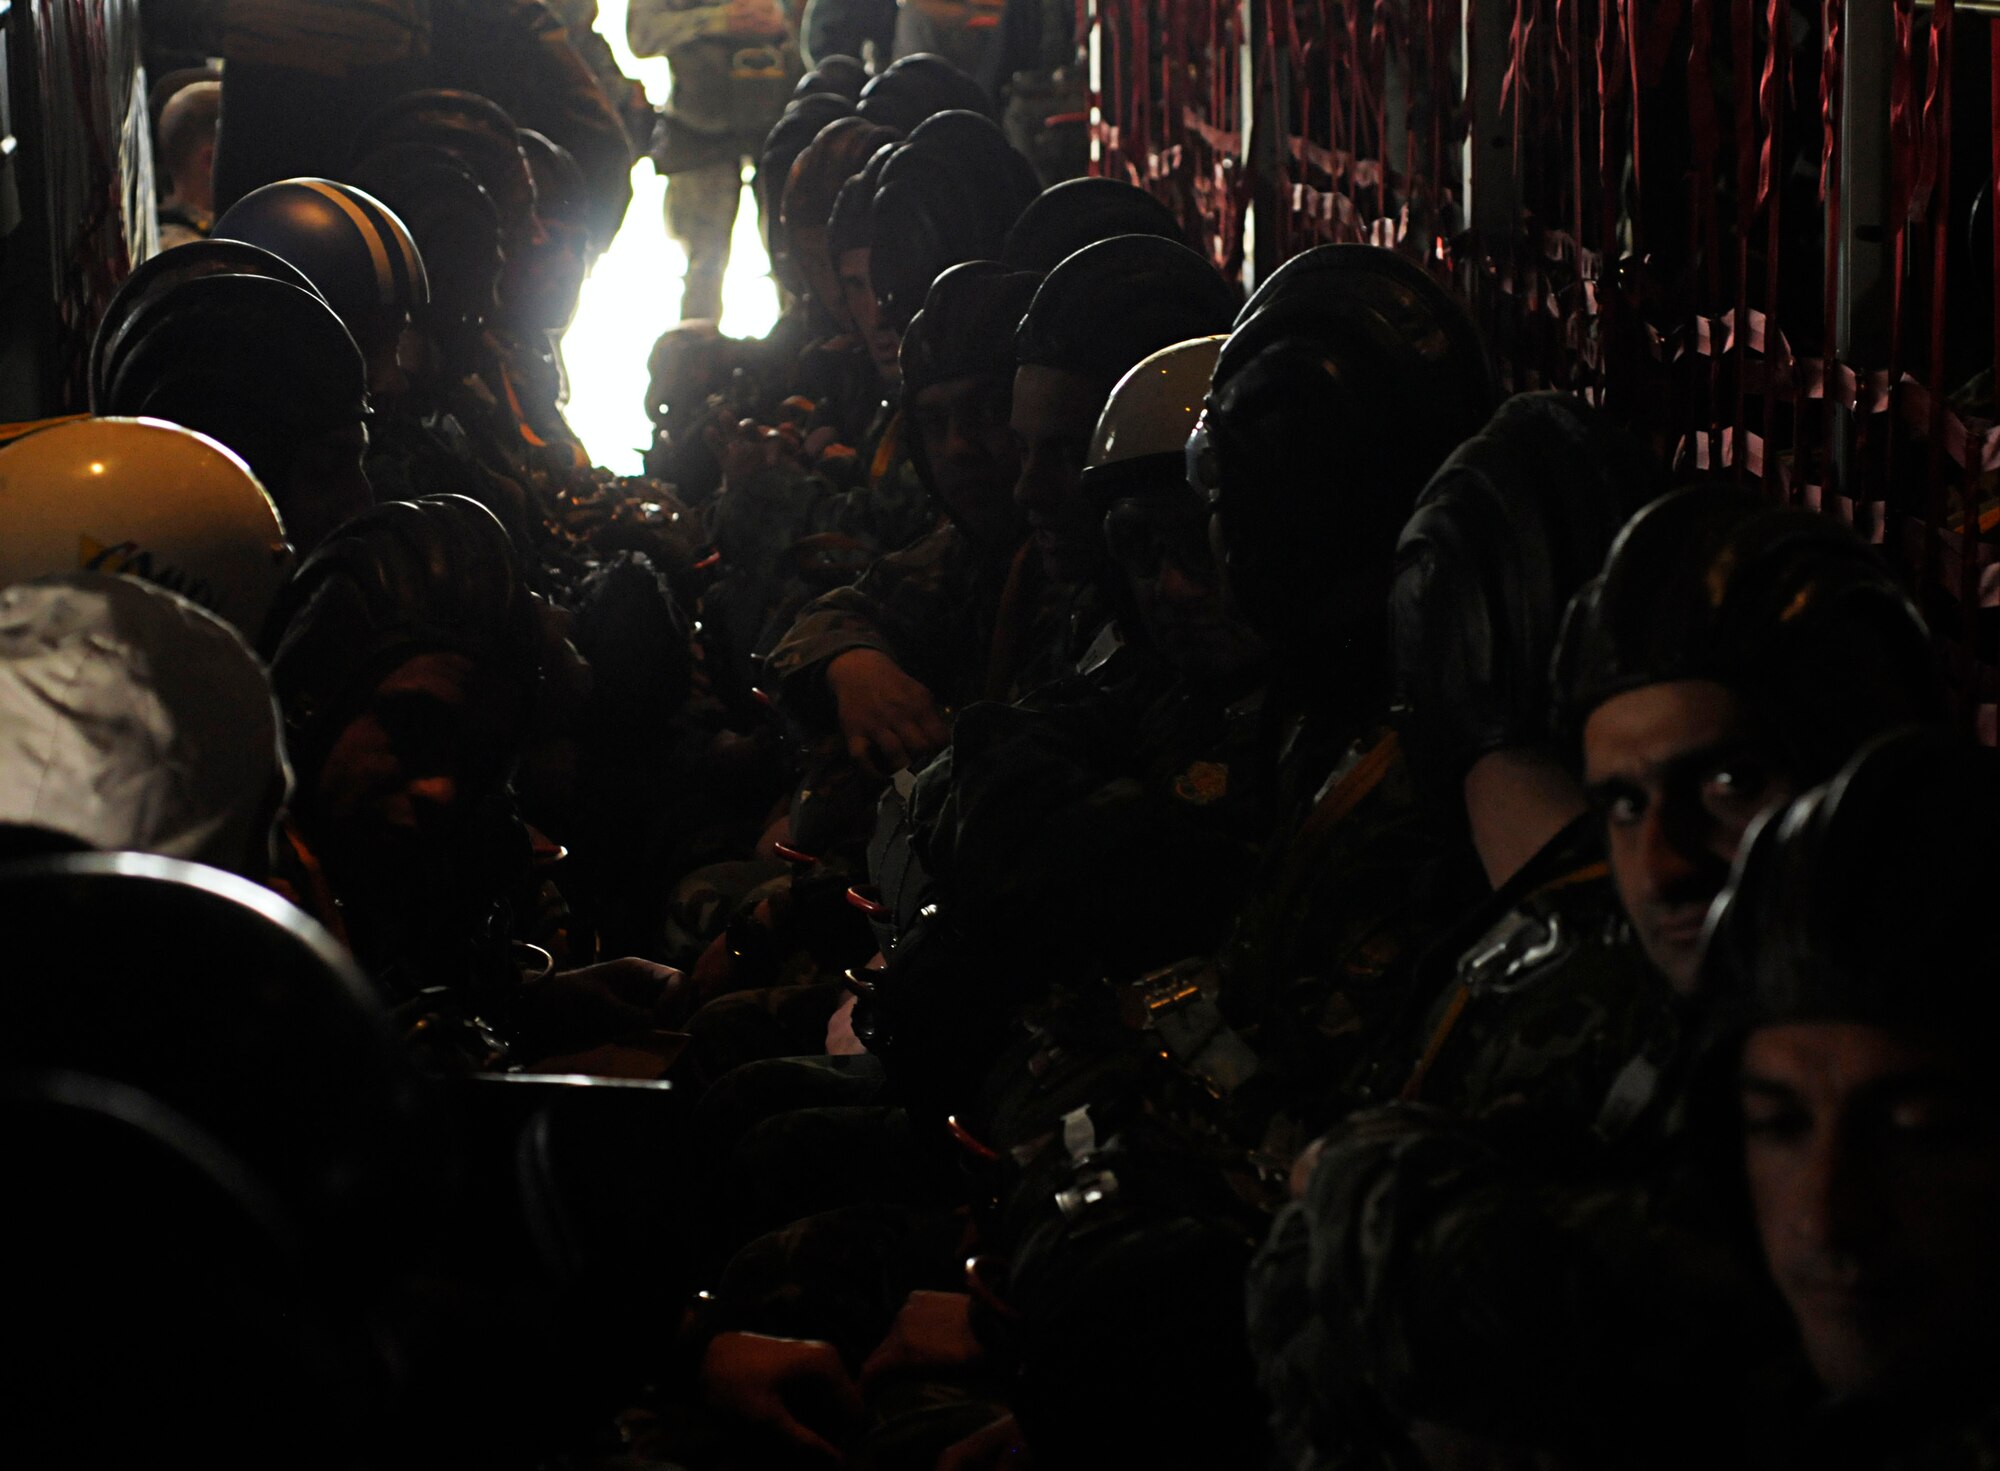 Bulgarian Air Force paratroopers prepare for their static line jump from a U.S. Air Force C-130J Super Hercules in support of Thracian Spring 2011, Plovdiv, Bulgaria, April 29, 2011. Thracian Spring 2011 is a two week on-site training designed to build partnerships between the U.S. and Bulgarian Air Force. (U.S. Air Force photo by Airman 1st Class Desiree W. Esposito)